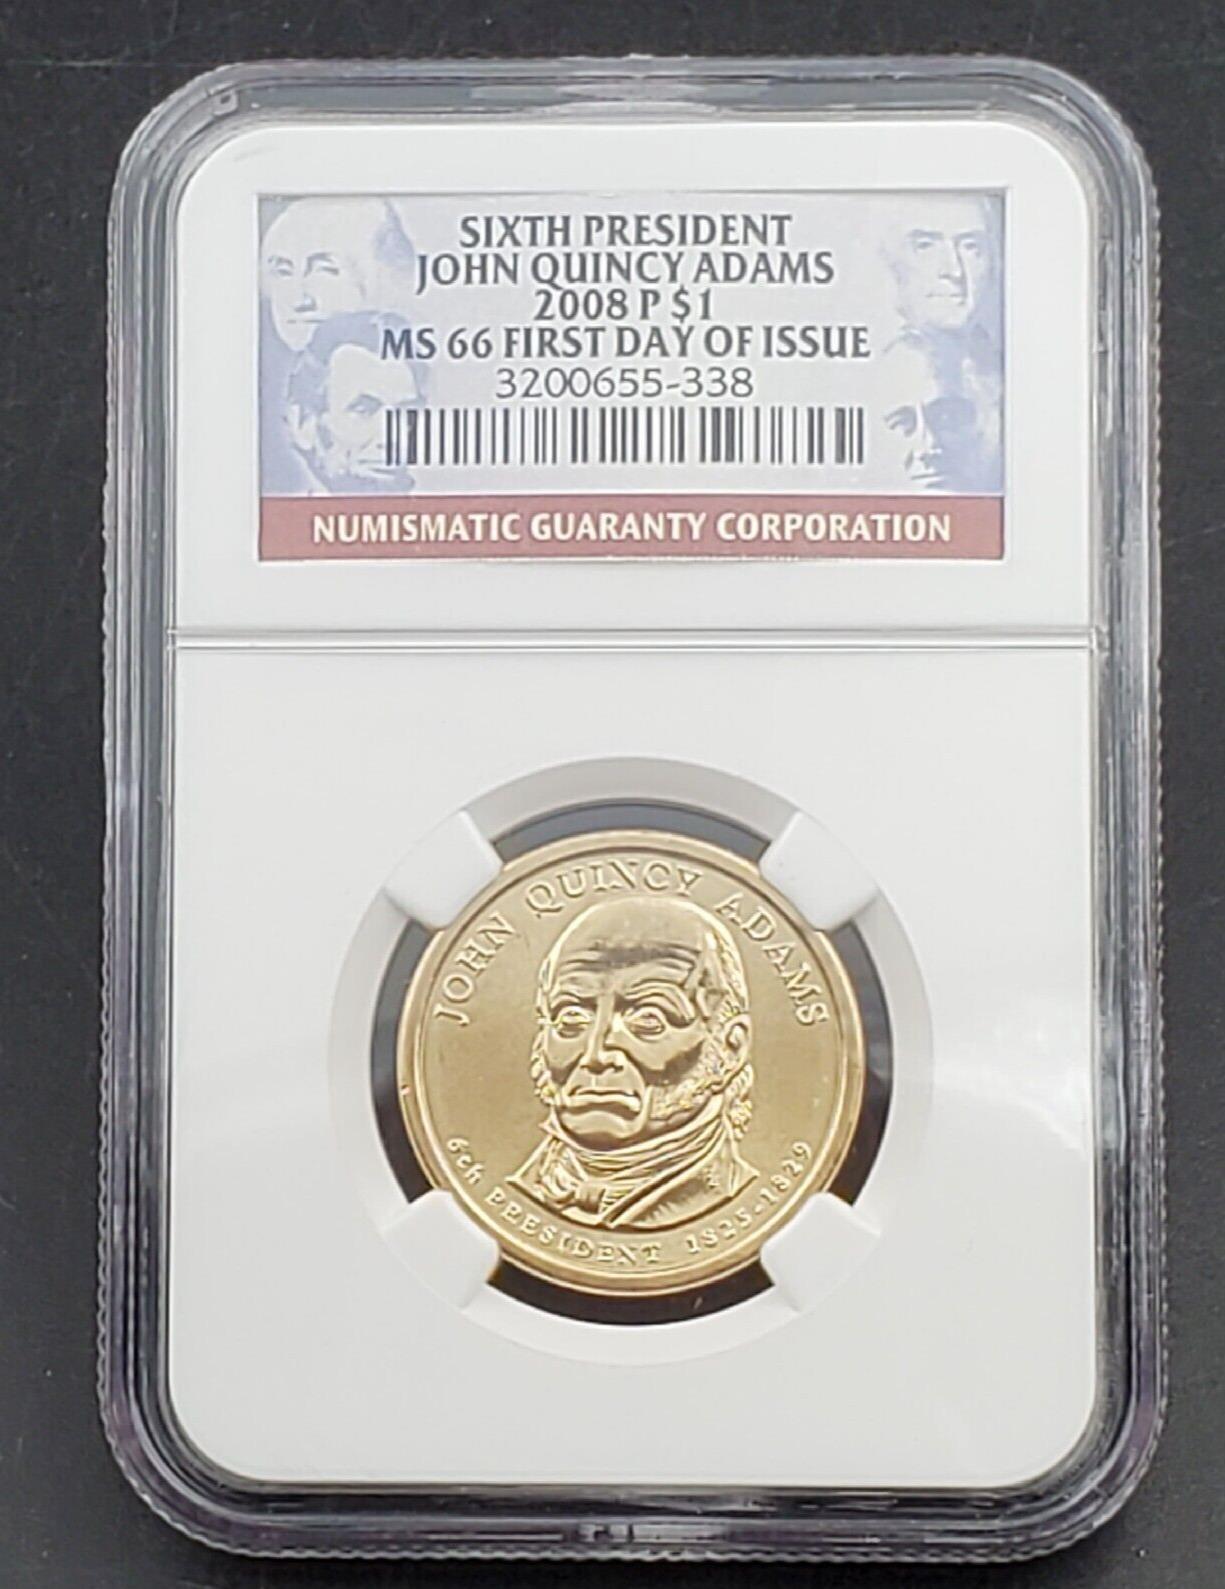 2008 P John Quincy Adams Presidential Dollar Coin MS66 First Day of Issue